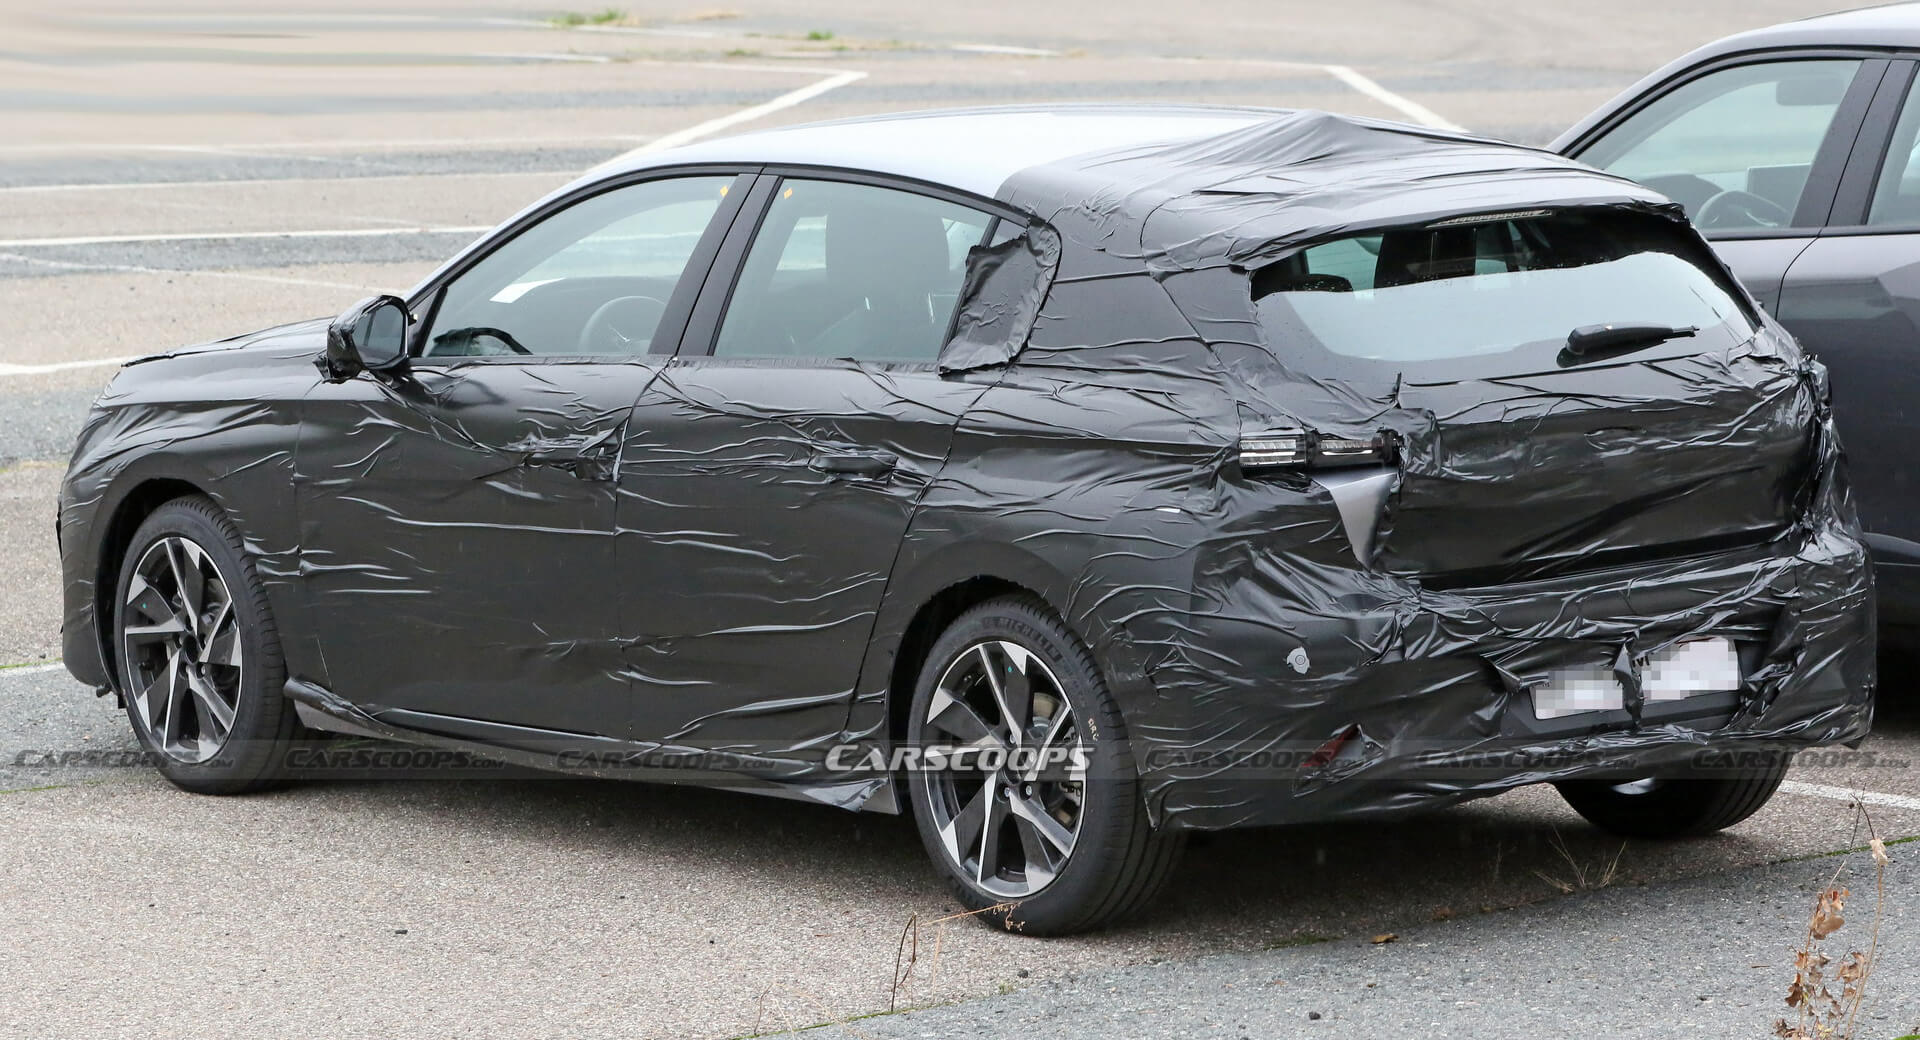 2021 Peugeot 308 Compact Hatchback Reveals More Details In New Spy Shots Carscoops